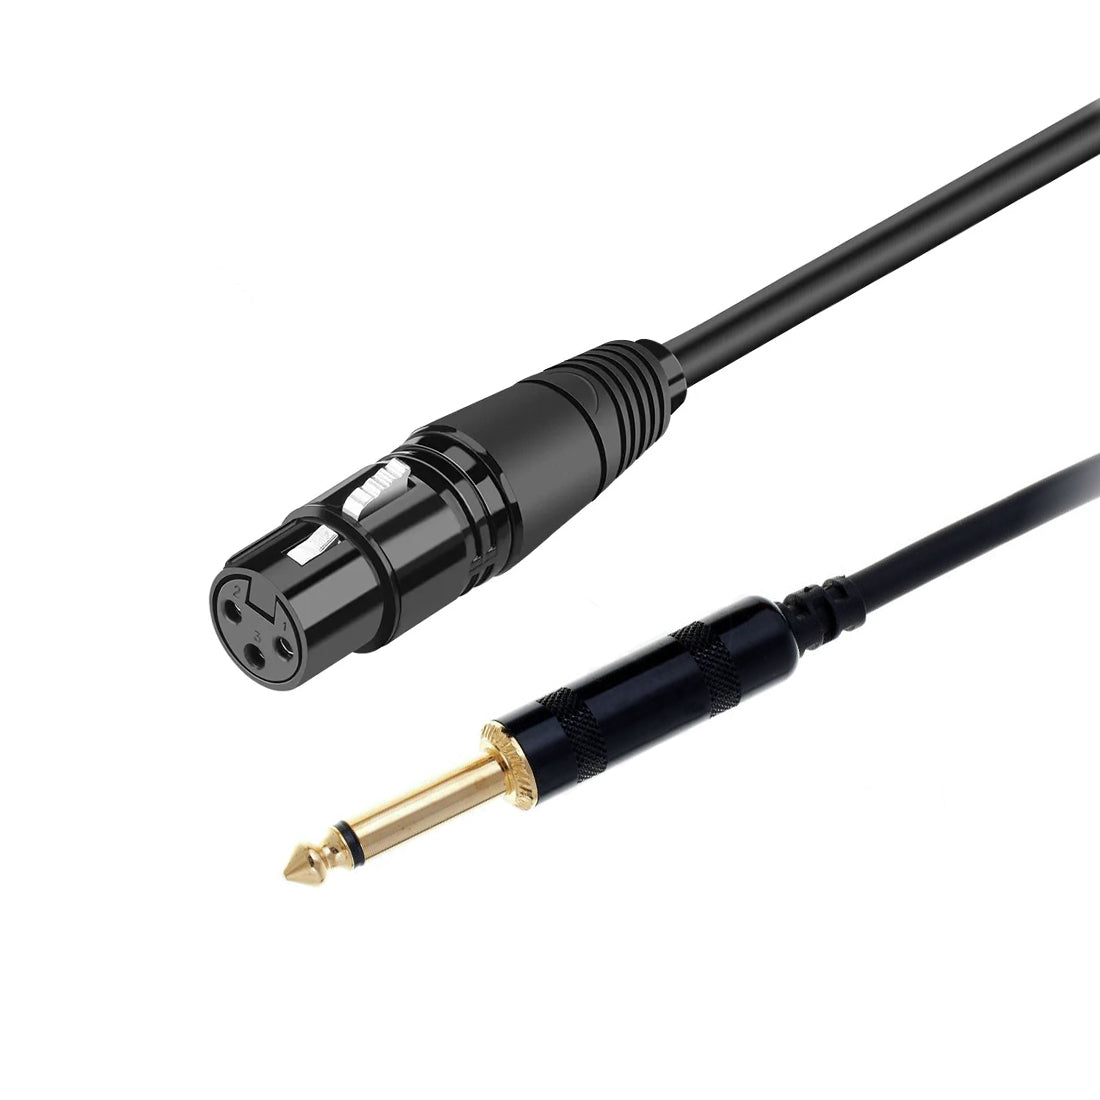 GBC Professional microphone cable from 6.3mm mono plug to 3-pole XLR socket, microphone cable 1.8 meters